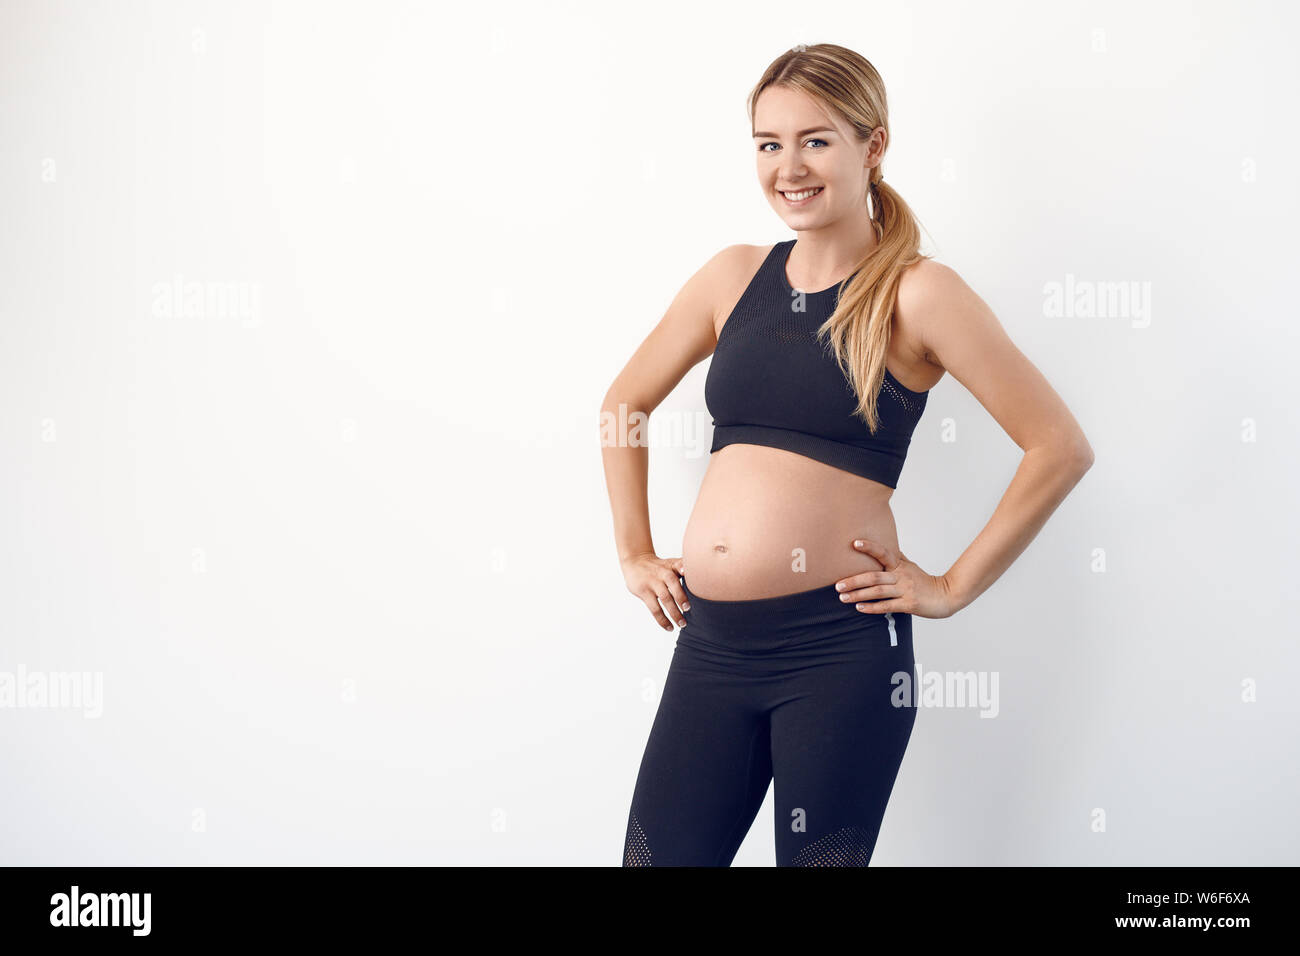 Happy healthy young pregnant woman in black sportswear standing with hands on hips looking at the camera with a beaming smile Stock Photo